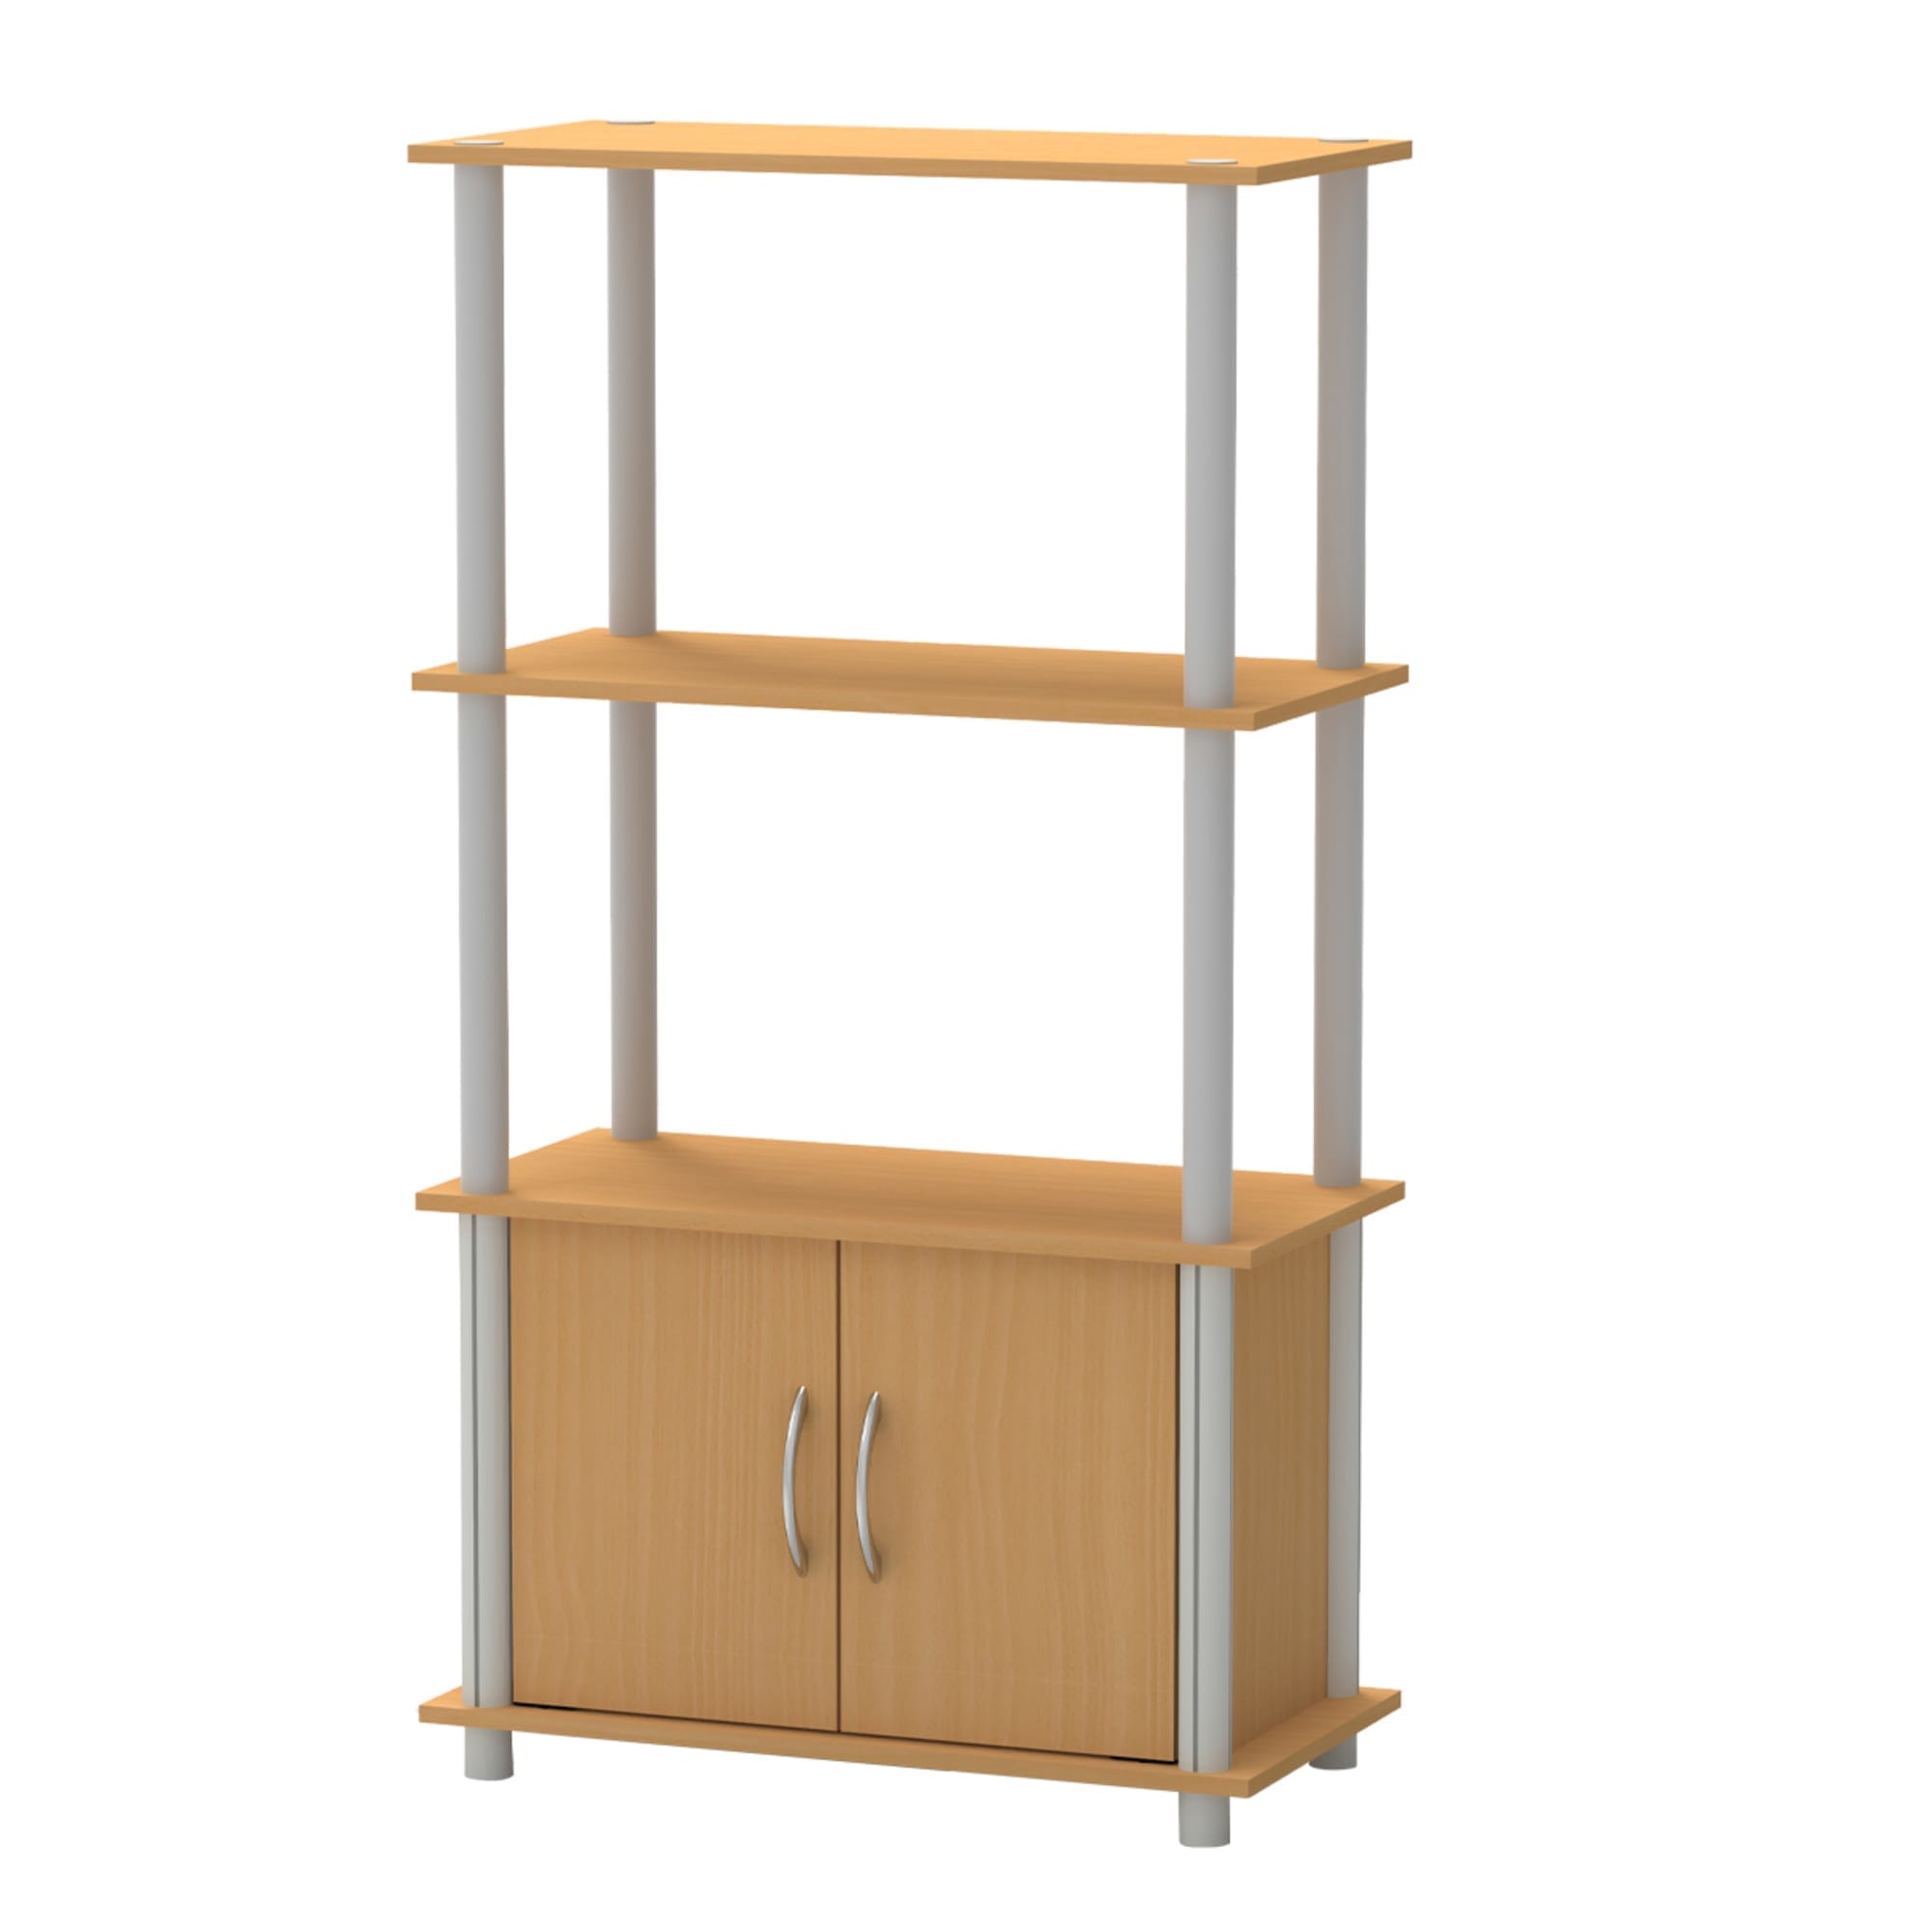 Home Basics 4 Tier Storage Shelf with Cabinet, Natural $40.00 EACH, CASE PACK OF 1